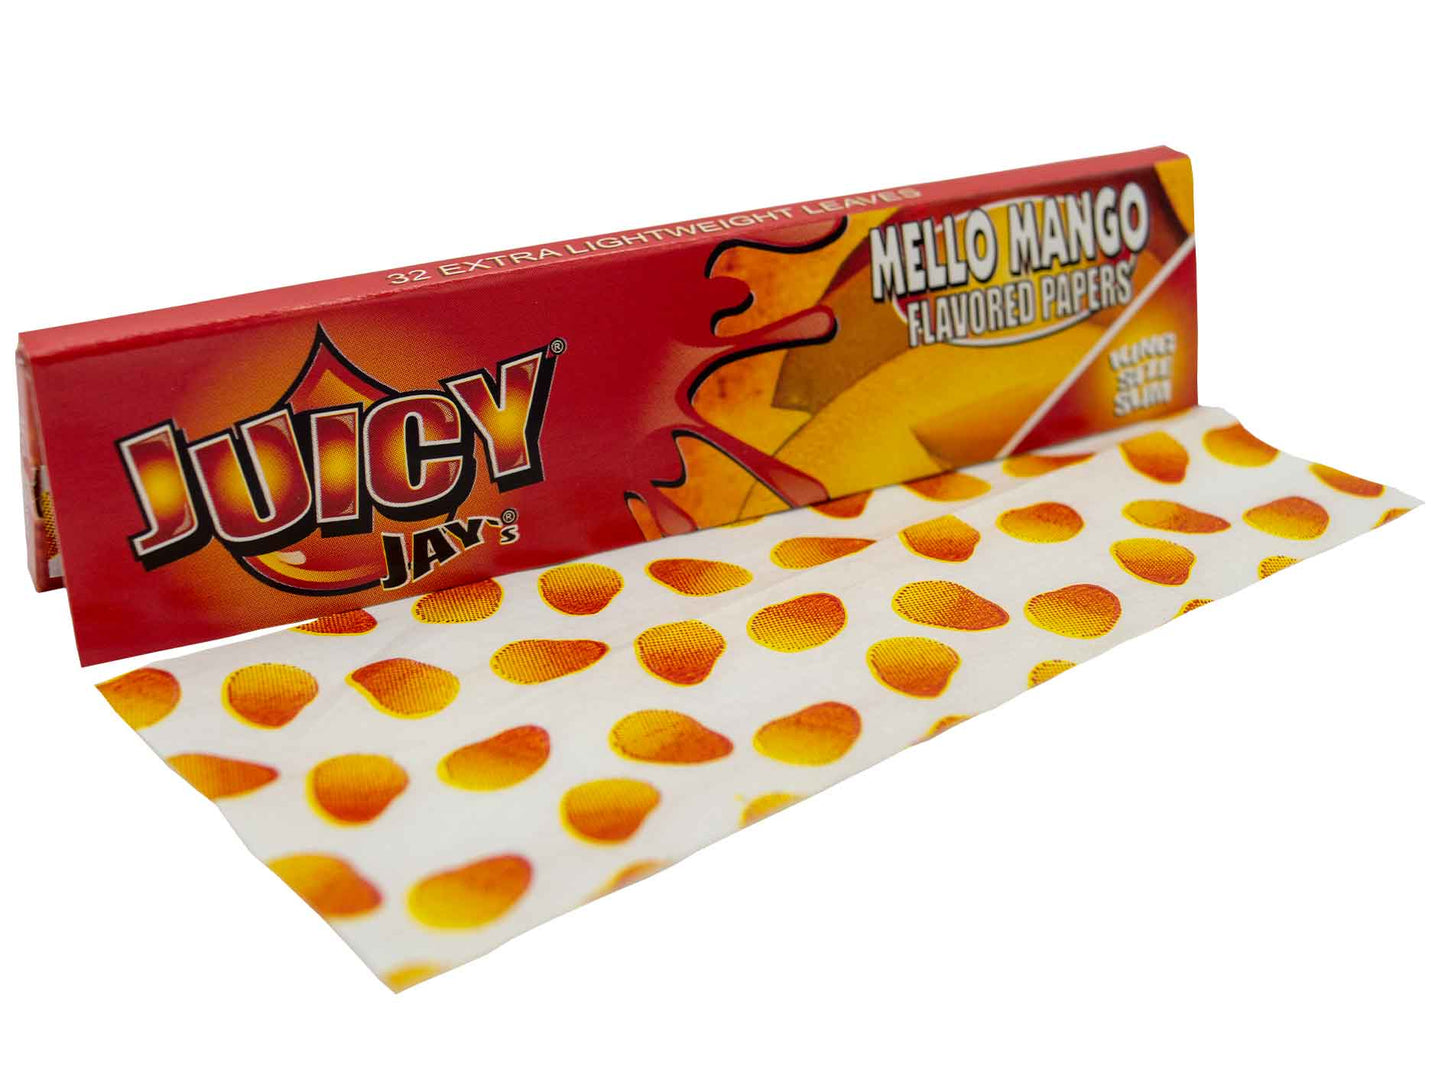 Juicy Jay's - Papers, King Size, Mellow Mango